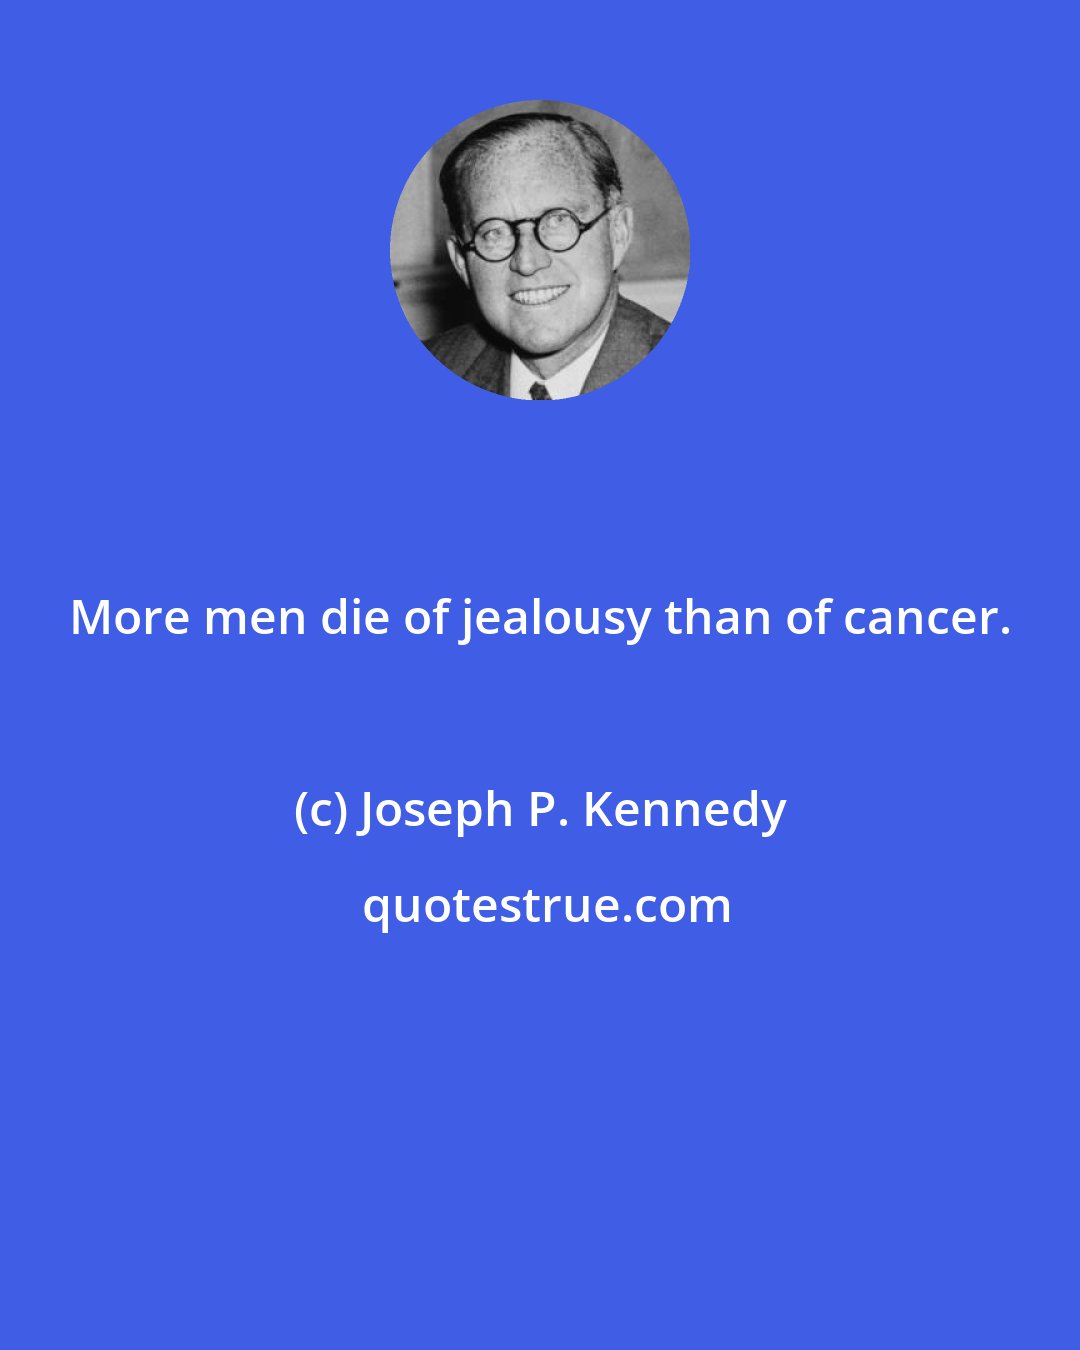 Joseph P. Kennedy: More men die of jealousy than of cancer.